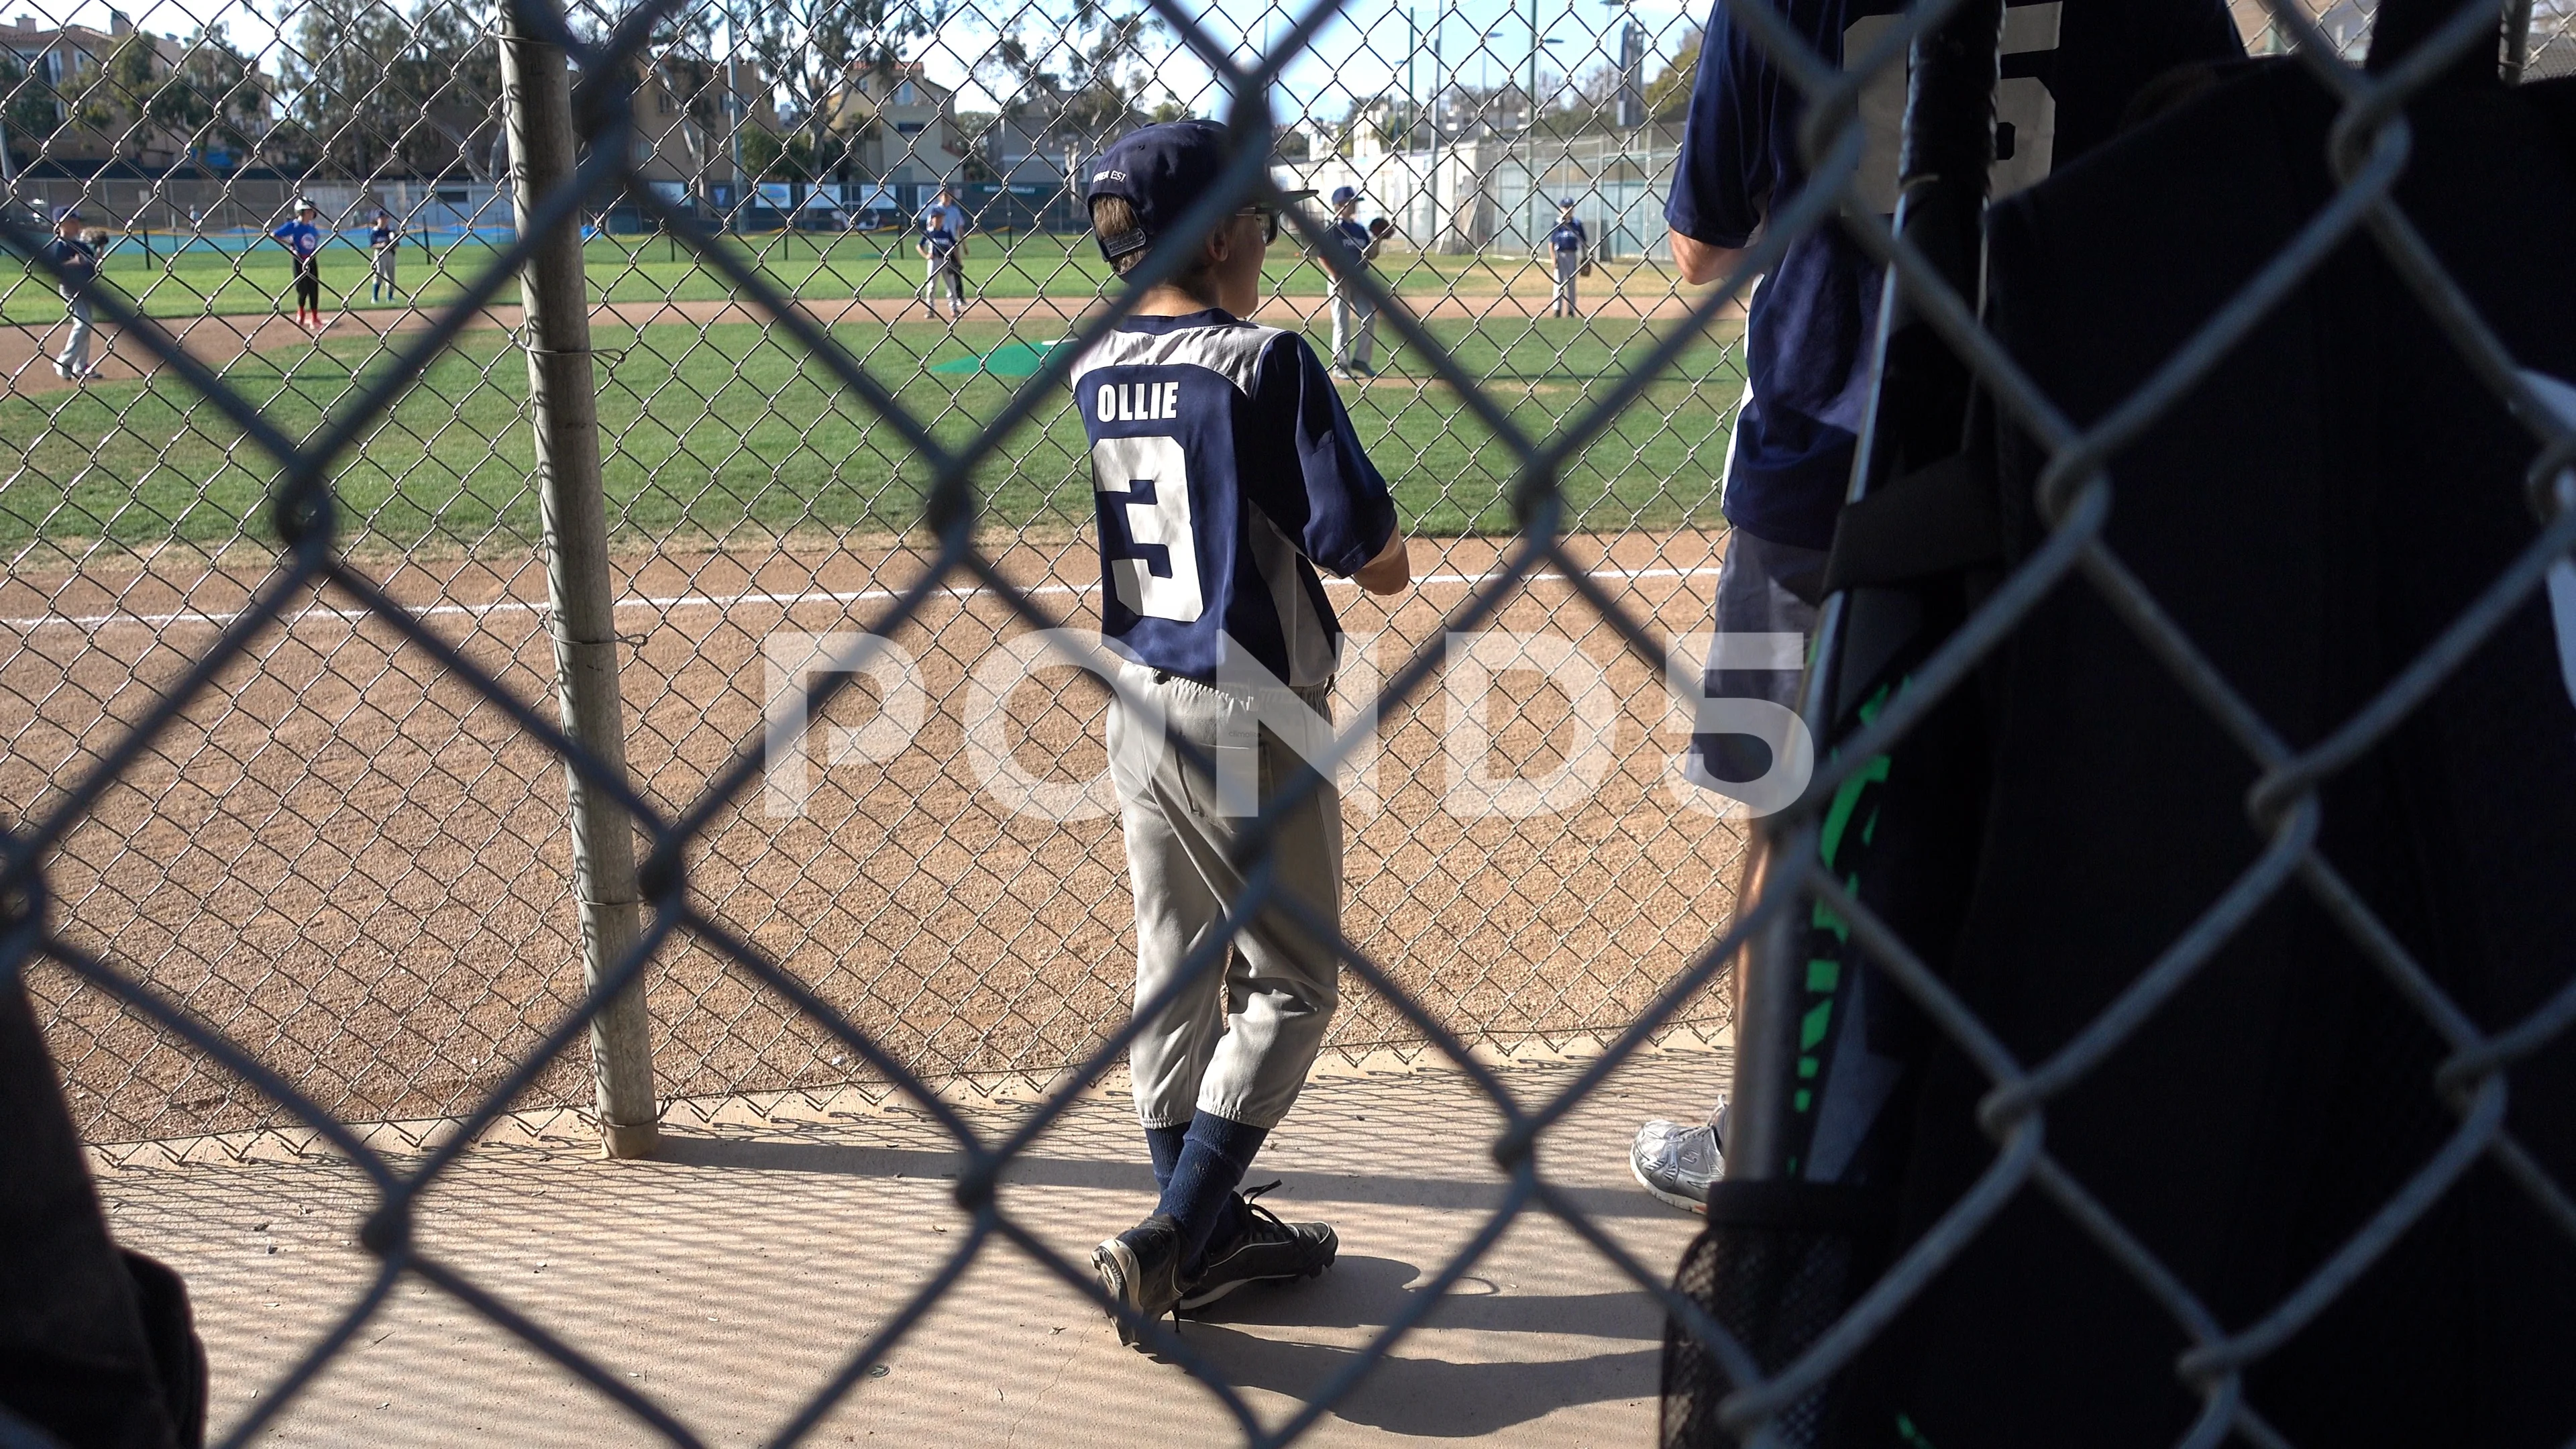 Youth Baseball Player Behind The Dugout Fence During A Game In